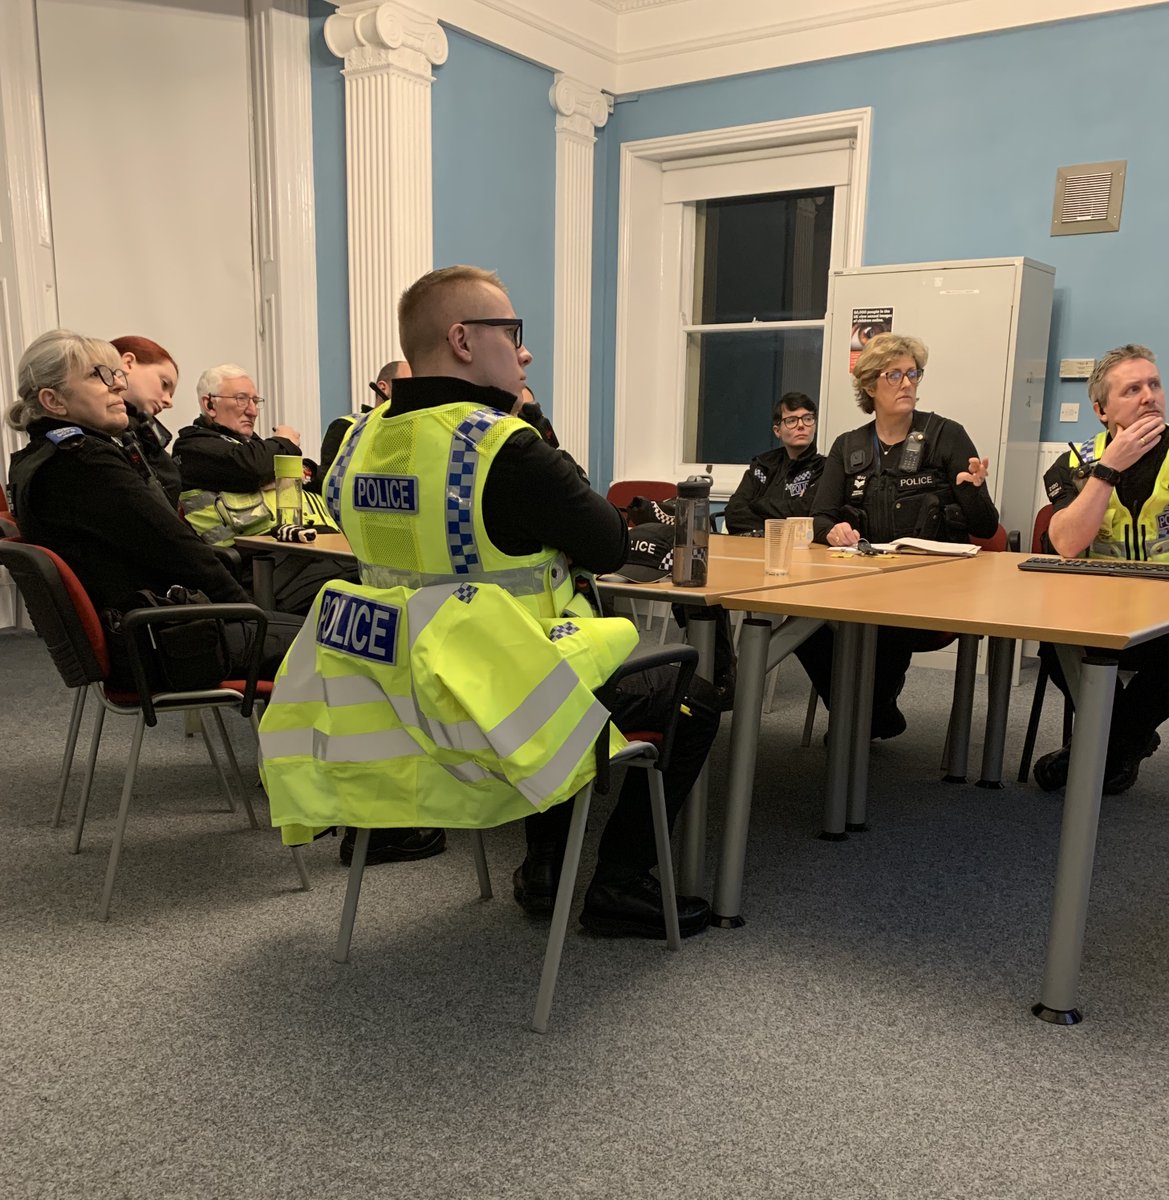 Team 1 are on NTE. Stay safe and well behaved. 
The Sgt is wearing her thermals tonight! @glospolspecials #StreetSafe #PartnershipWork #Reassurance